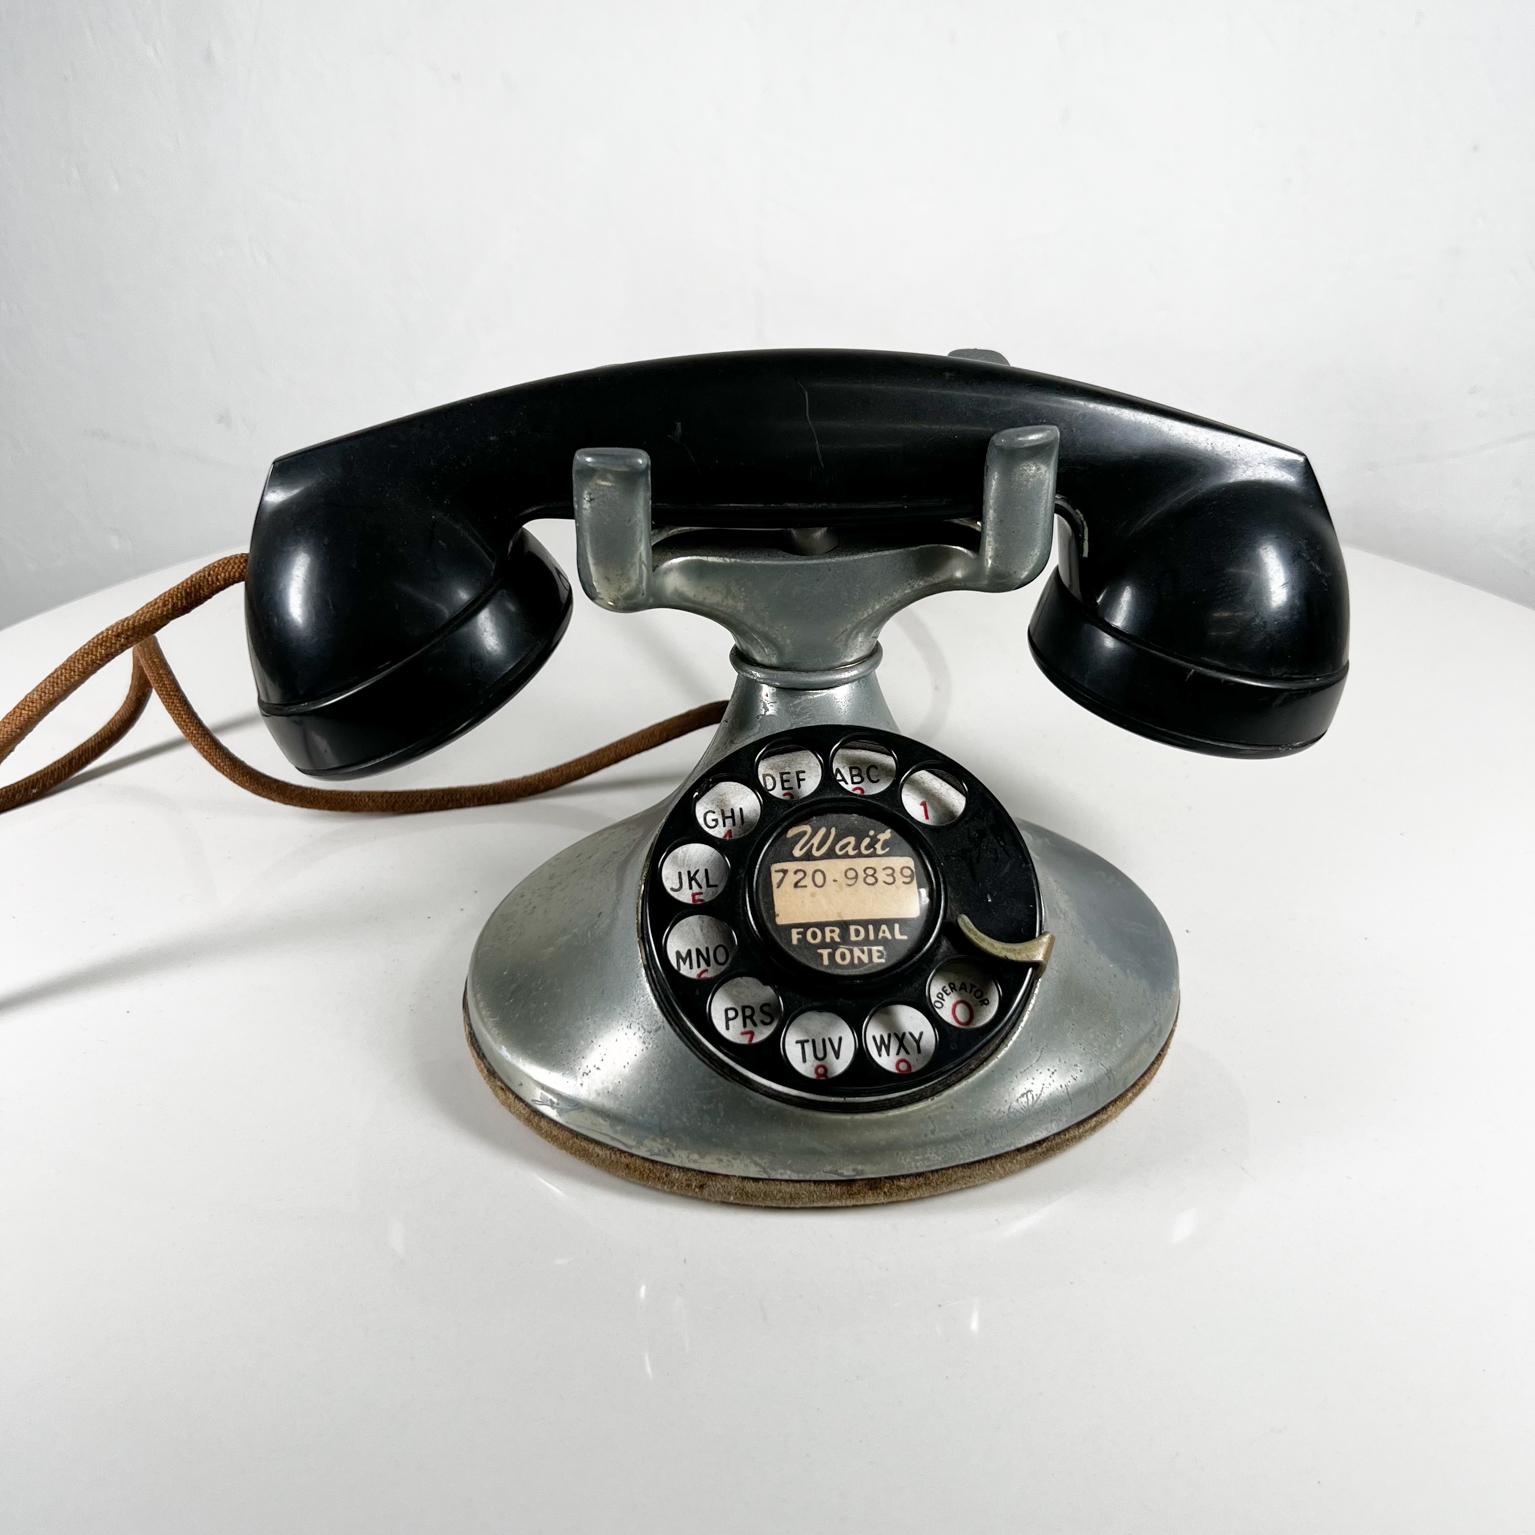 1940s Antique Silver Telephone Western Electric Bell System 
Rotary dial vintage Phone with ringer untested.
9 w x 5 d x 5 h
Selling as is presented vintage untested condition.
See all images.


